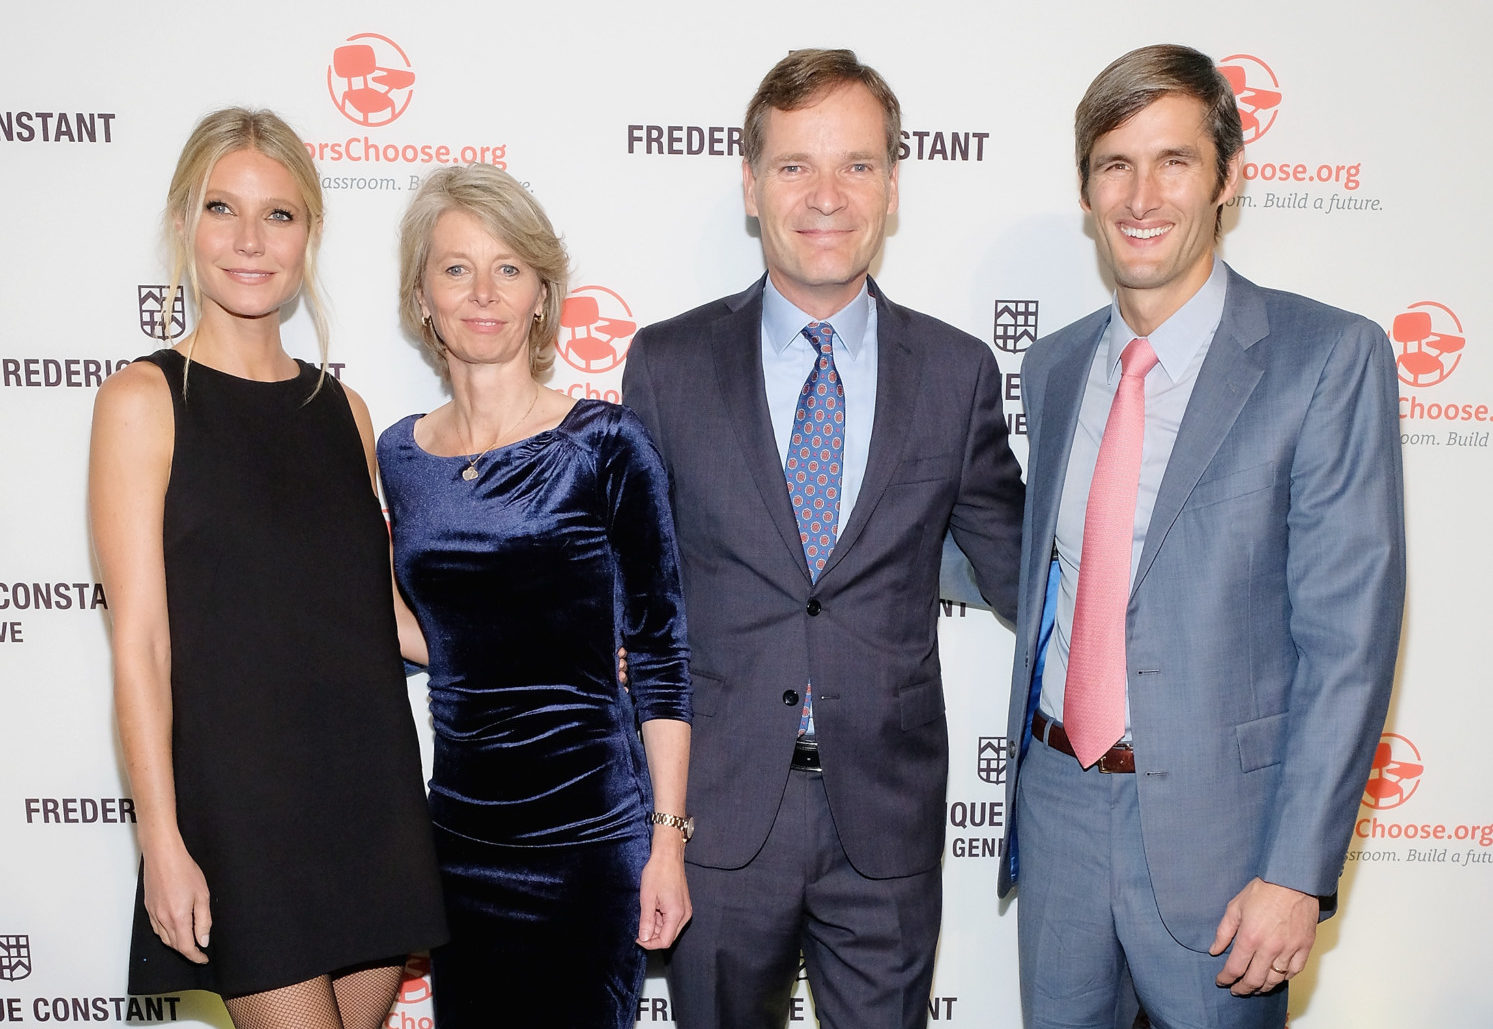 New york, ny - november 02: (l-r) gwyneth paltrow, aletta stas, peter stas and charles best attend the frederique constant horological smartwatch launch event at spring studios on november 2, 2016 in new york city. (photo by d dipasupil/getty images for frederique constant) *** local caption *** gwyneth paltrow;aletta stas;peter stas;charles best